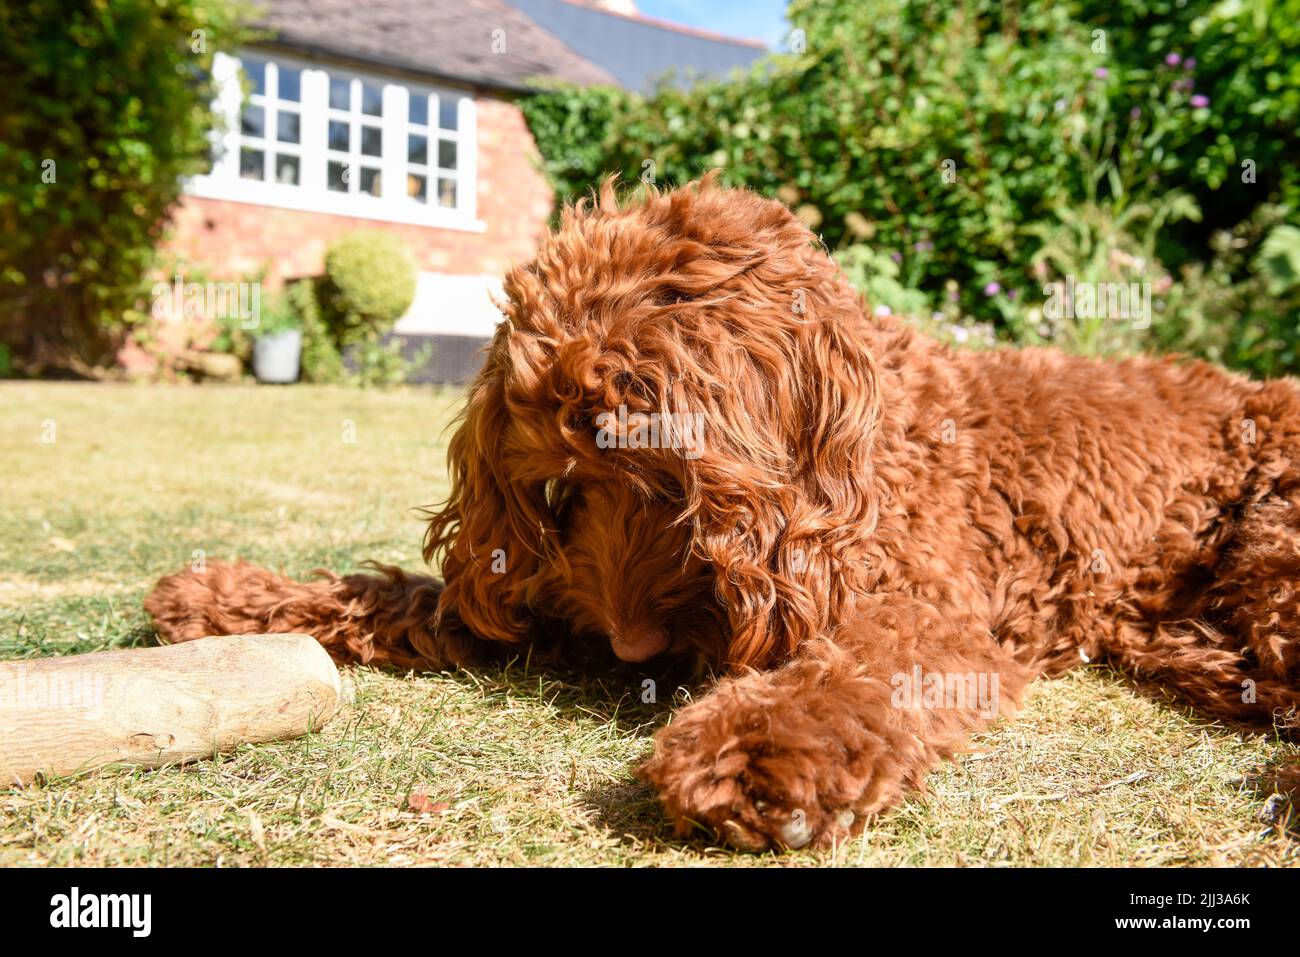 A pet puppy dog lying down on the lawn in a garden during hot weather Stock Photo